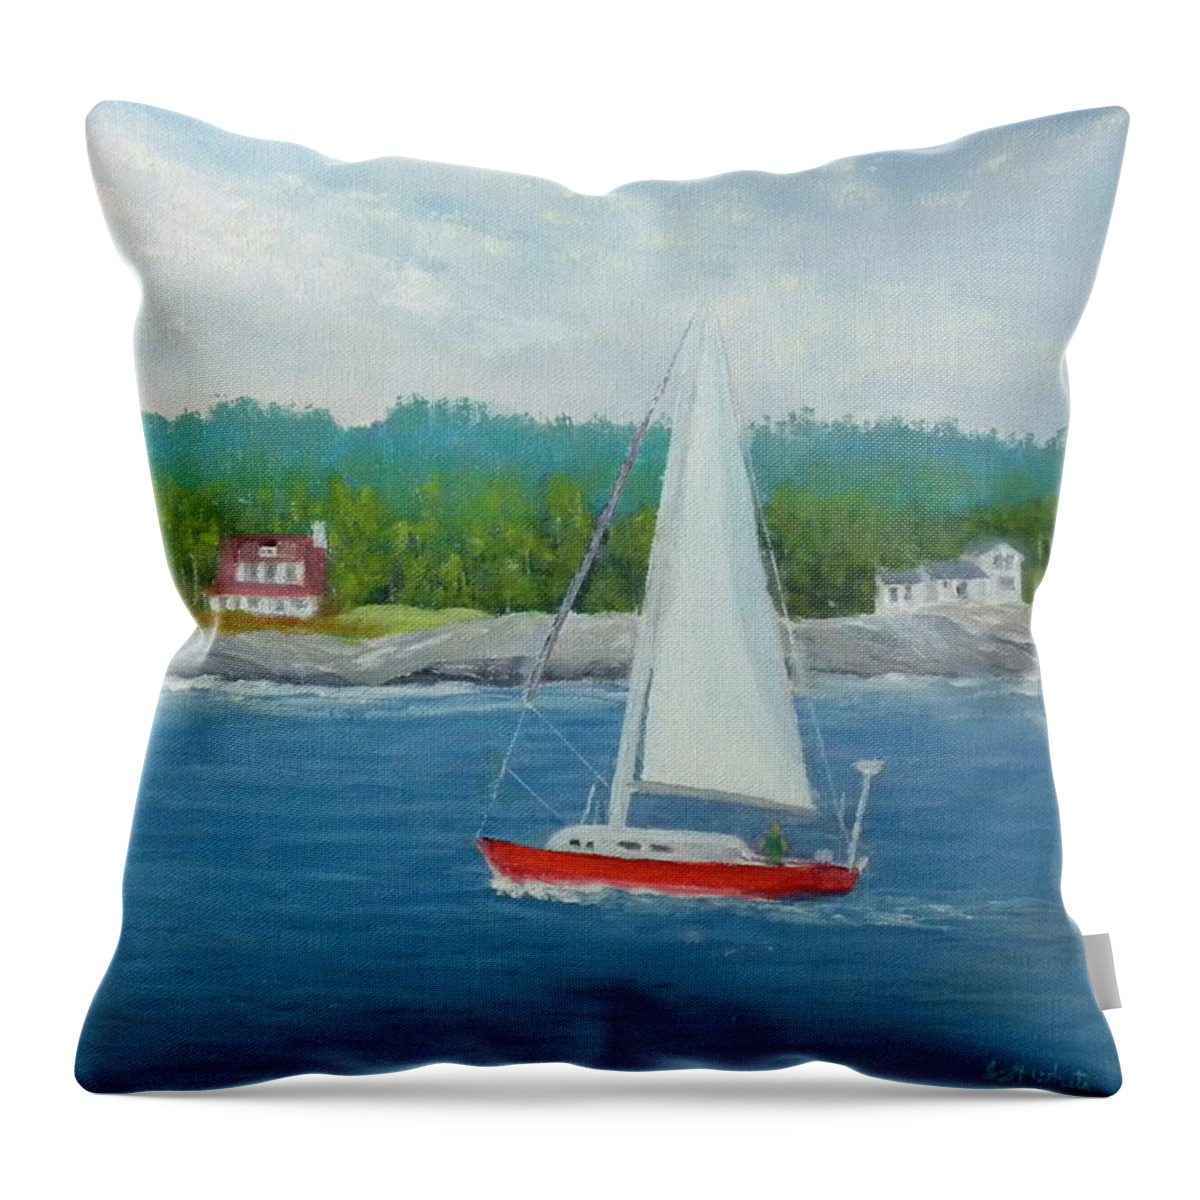 Beach Sailing Boat Seascape Landscape Ocean Houses Woods Harbor Waves Rocks Artist Scott White Throw Pillow featuring the painting Sailing To New Harbor by Scott W White